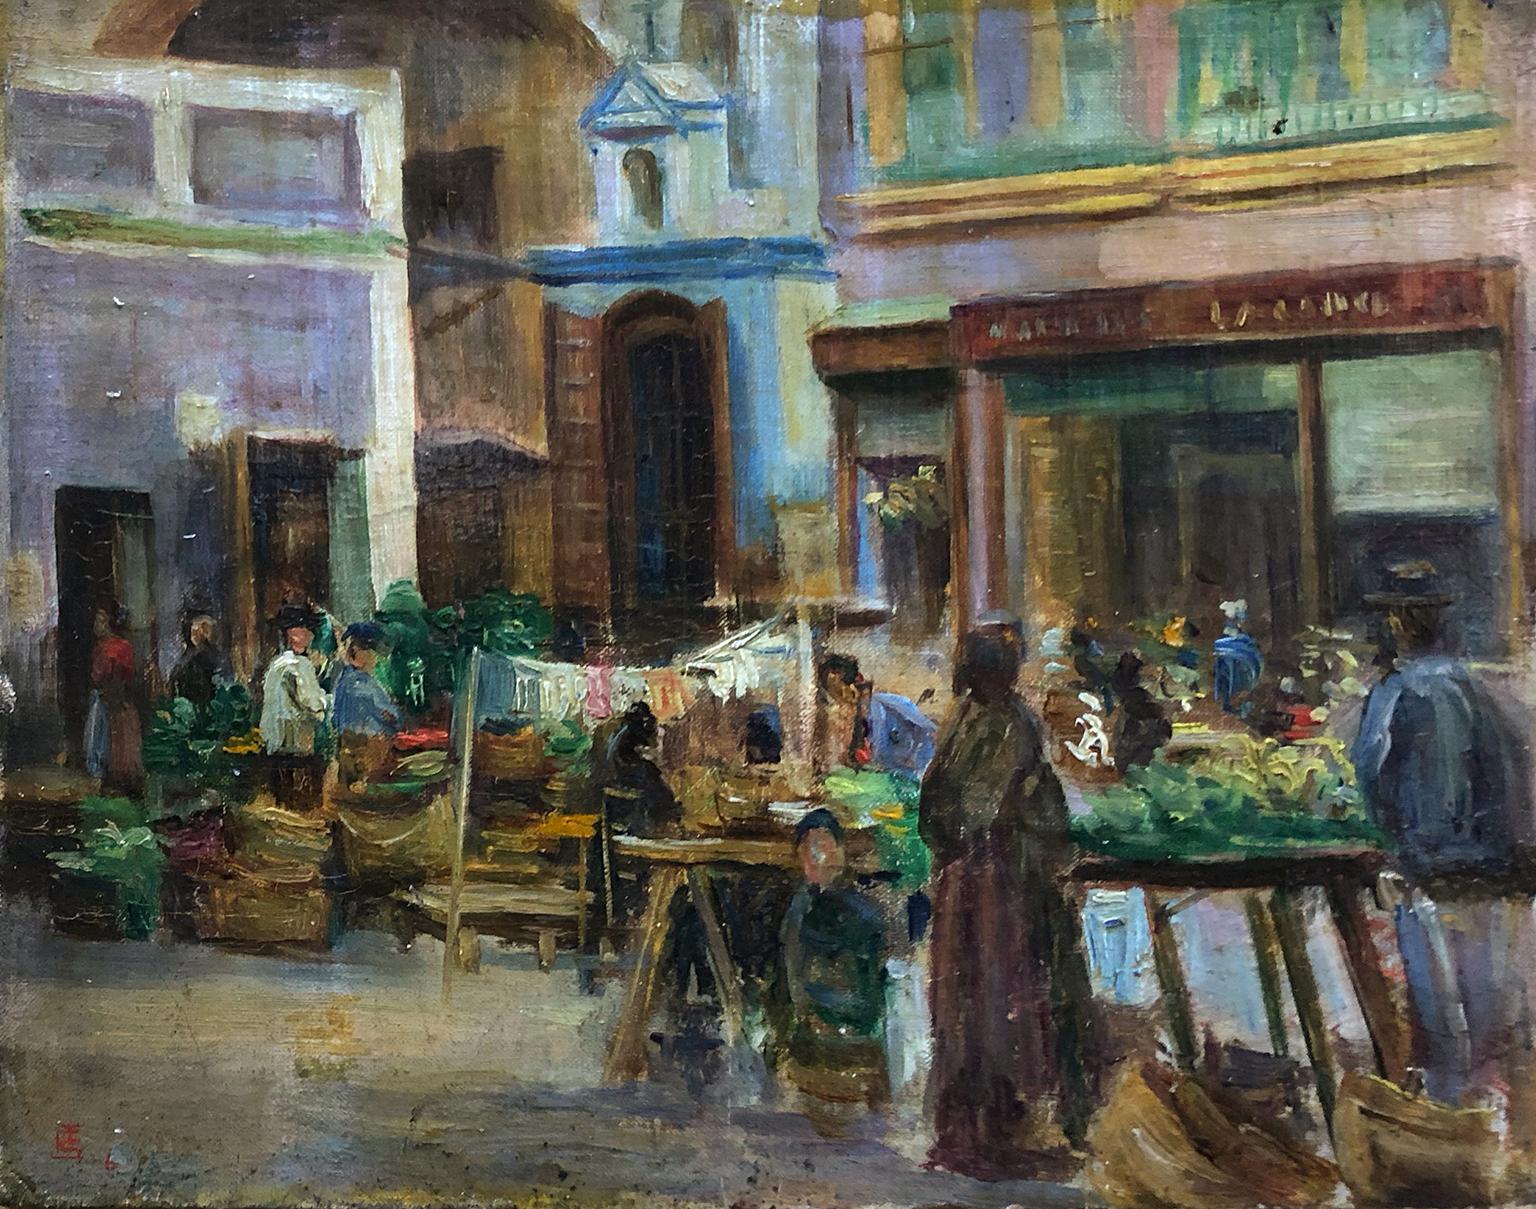 This is a lovely impressionist painting by Edgar Seligman dated 6 (1906) and monogramed E.S. Handwritten label verso reads: (A Market, Sevilla. Edgar Seligman, 29 Hyde Park Gate SW). Seligman lived directly opposite Sir Winston Churchill who lived